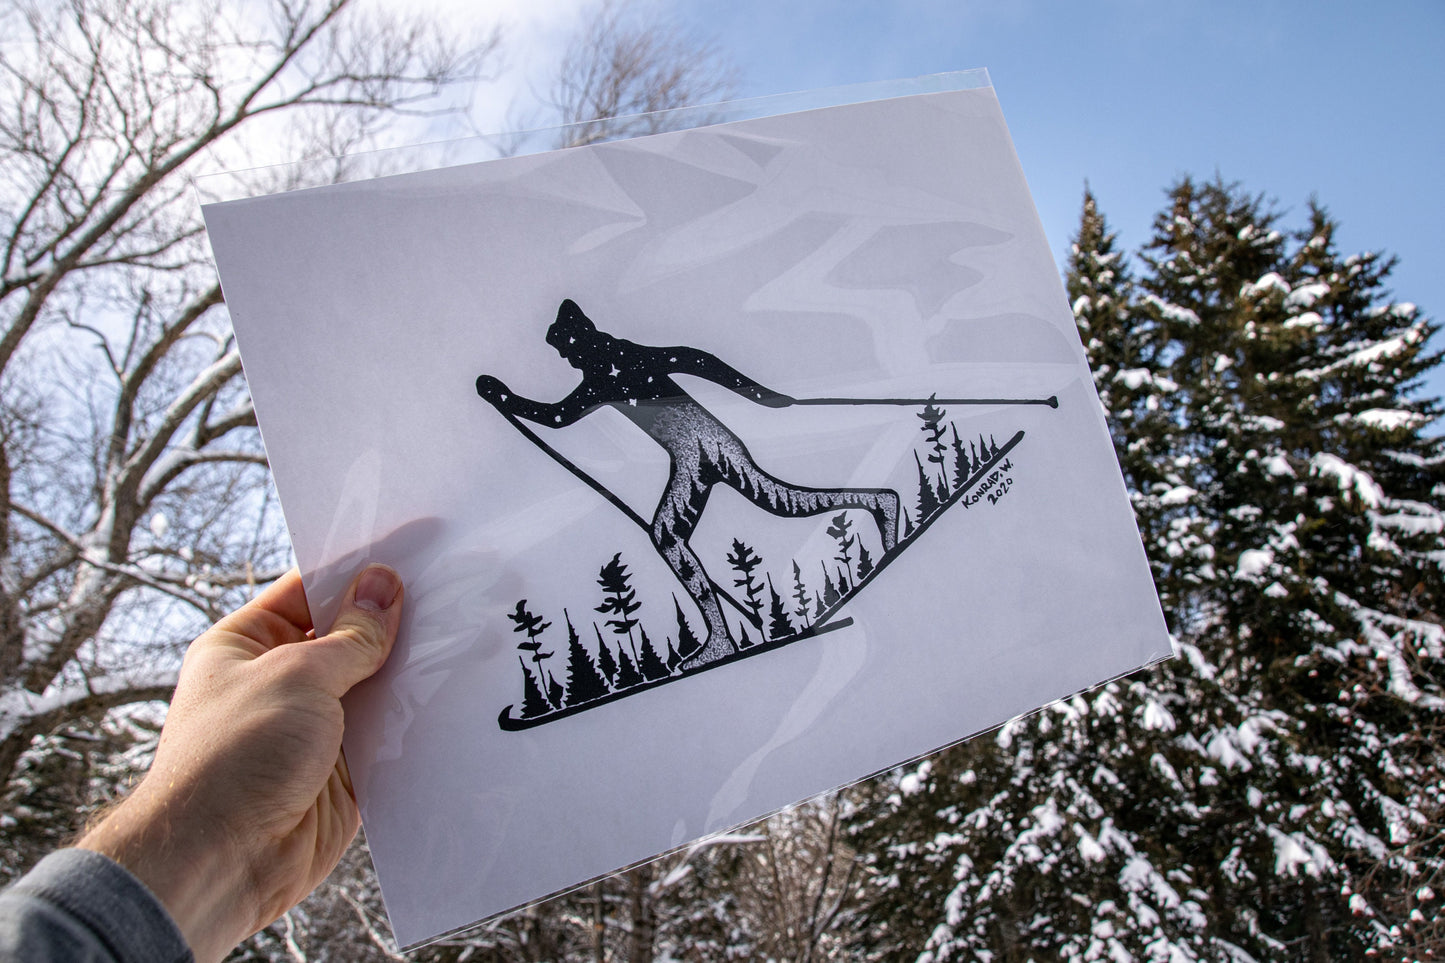 Male Nordic Skier - Pen and Ink PRINT